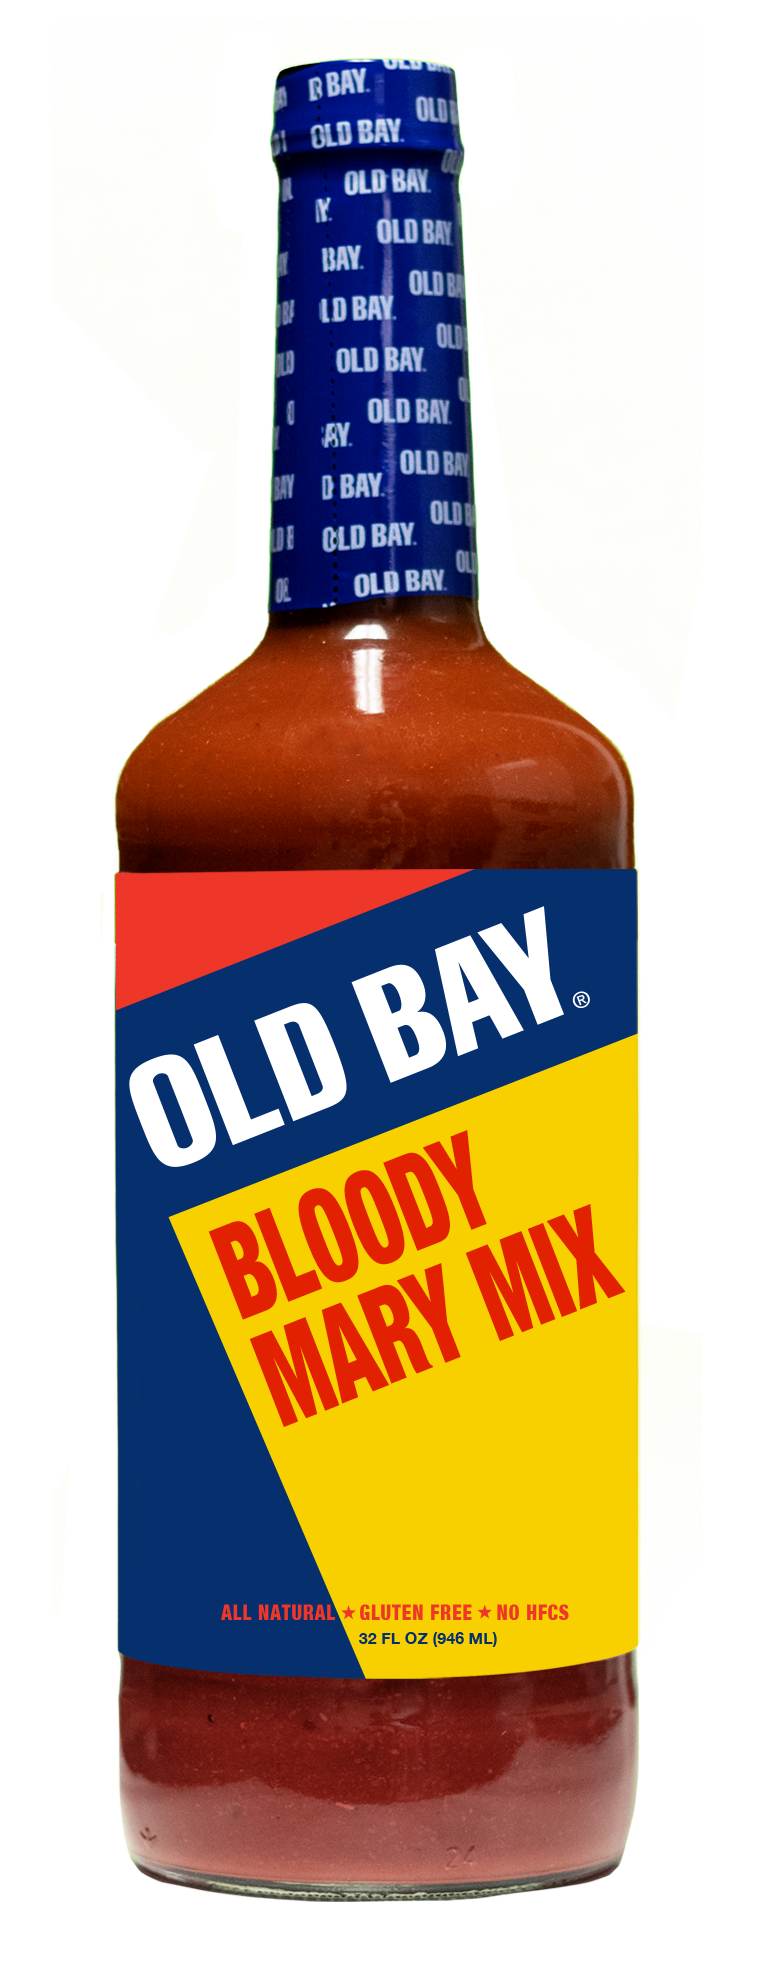 Georges old bay mix 768x1975 2 thumb200